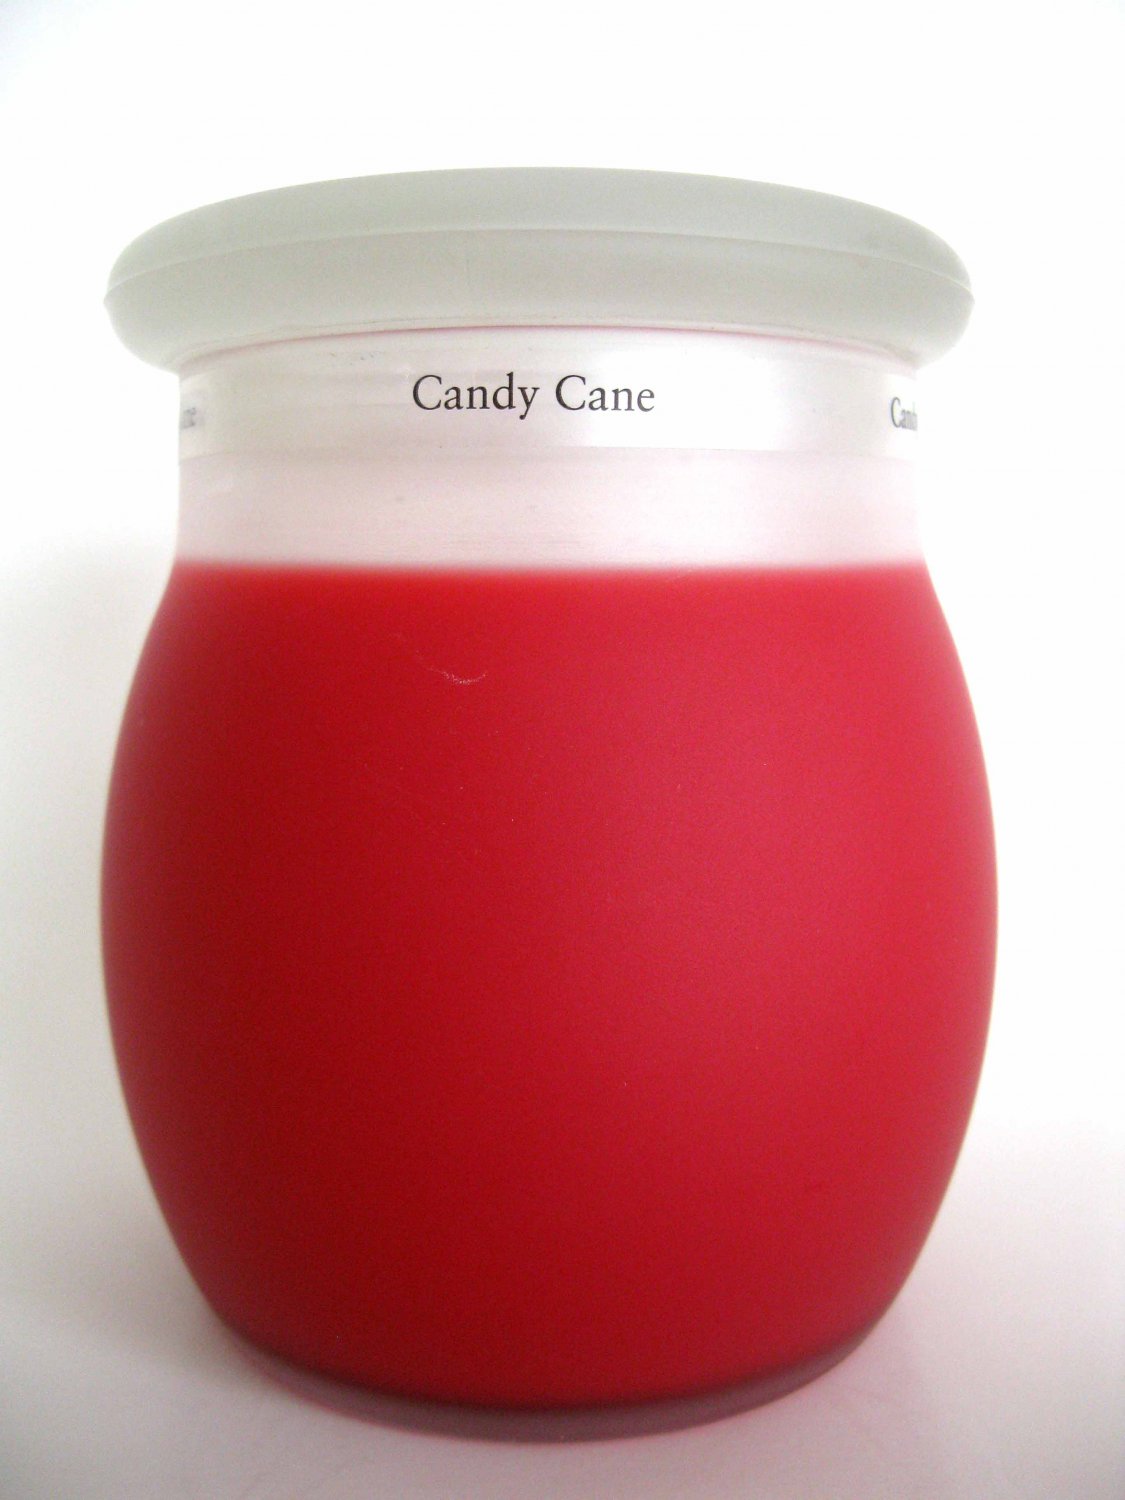 Illuminations Yankee Candy Cane Scented Candle Candycane ...
